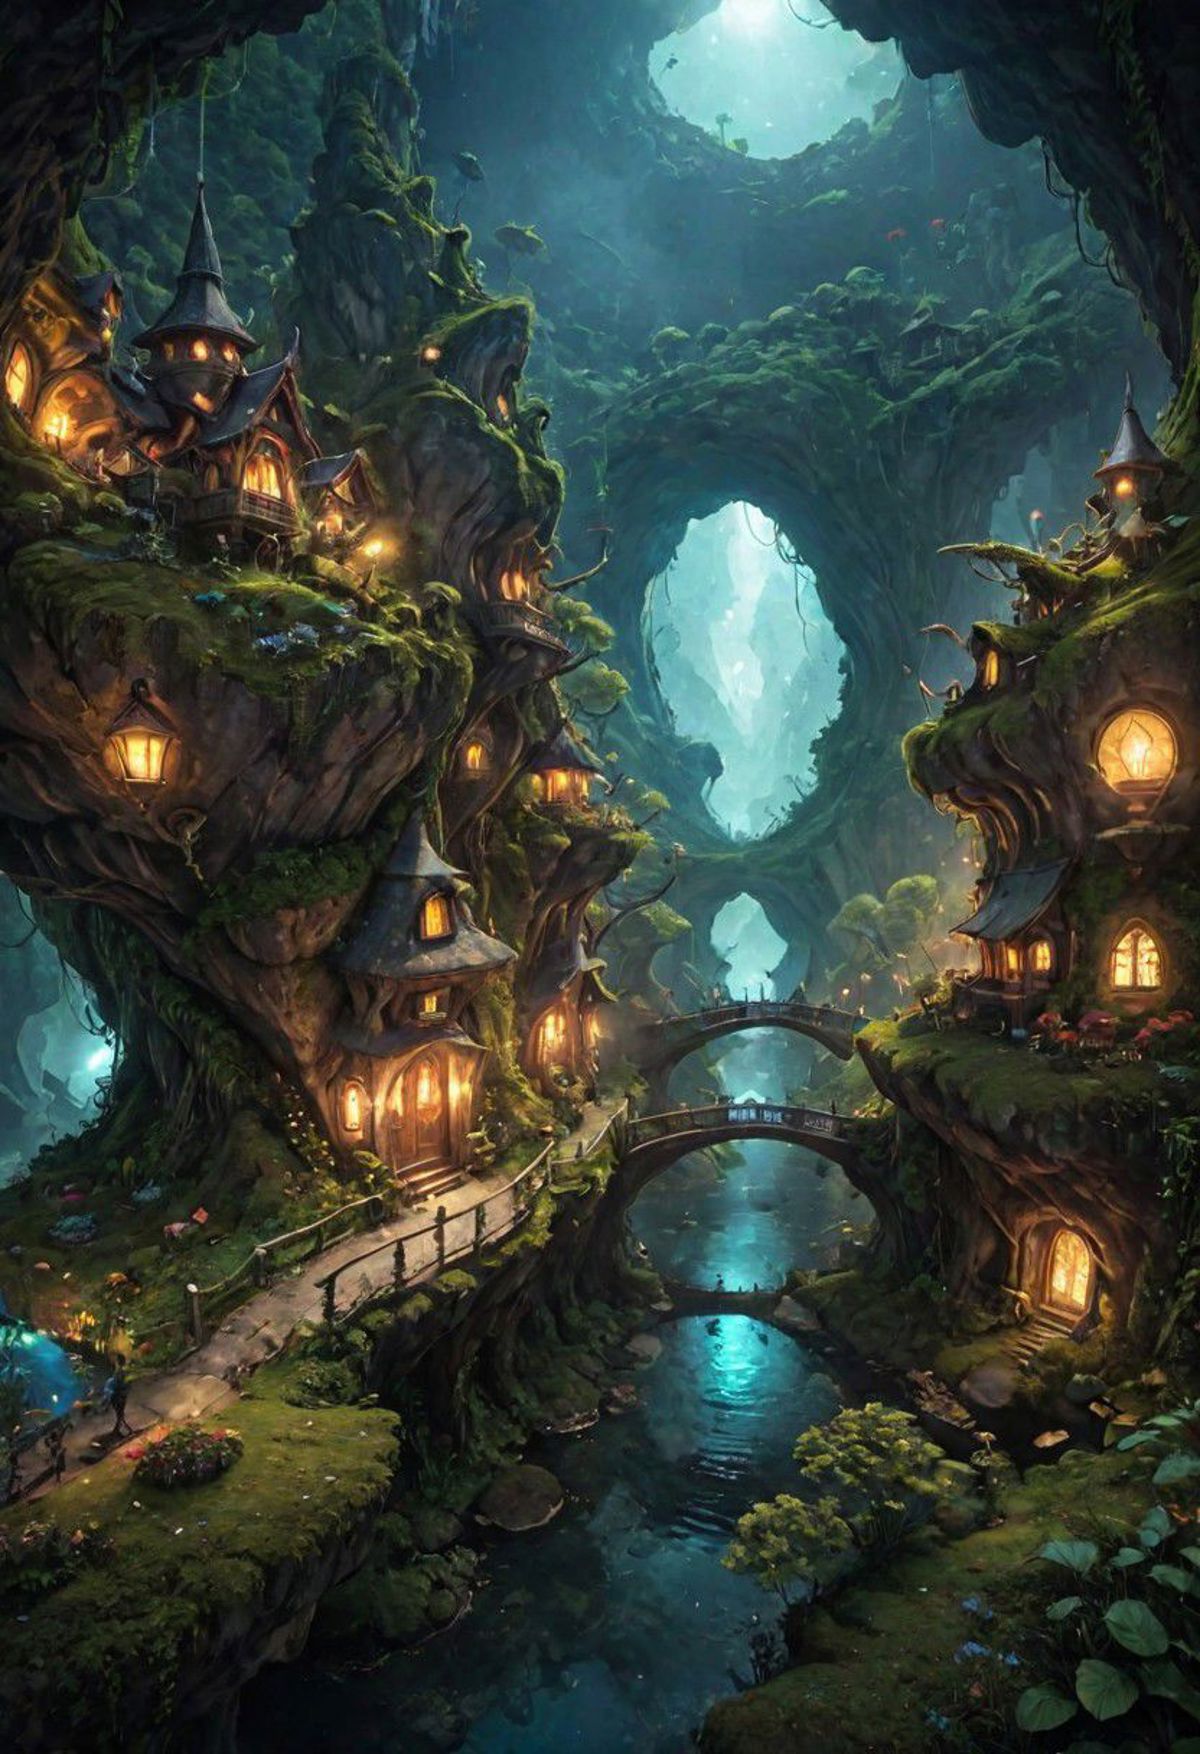 A fantasy scene with a bridge crossing over a river, surrounded by houses, trees, and a jungle-like environment.